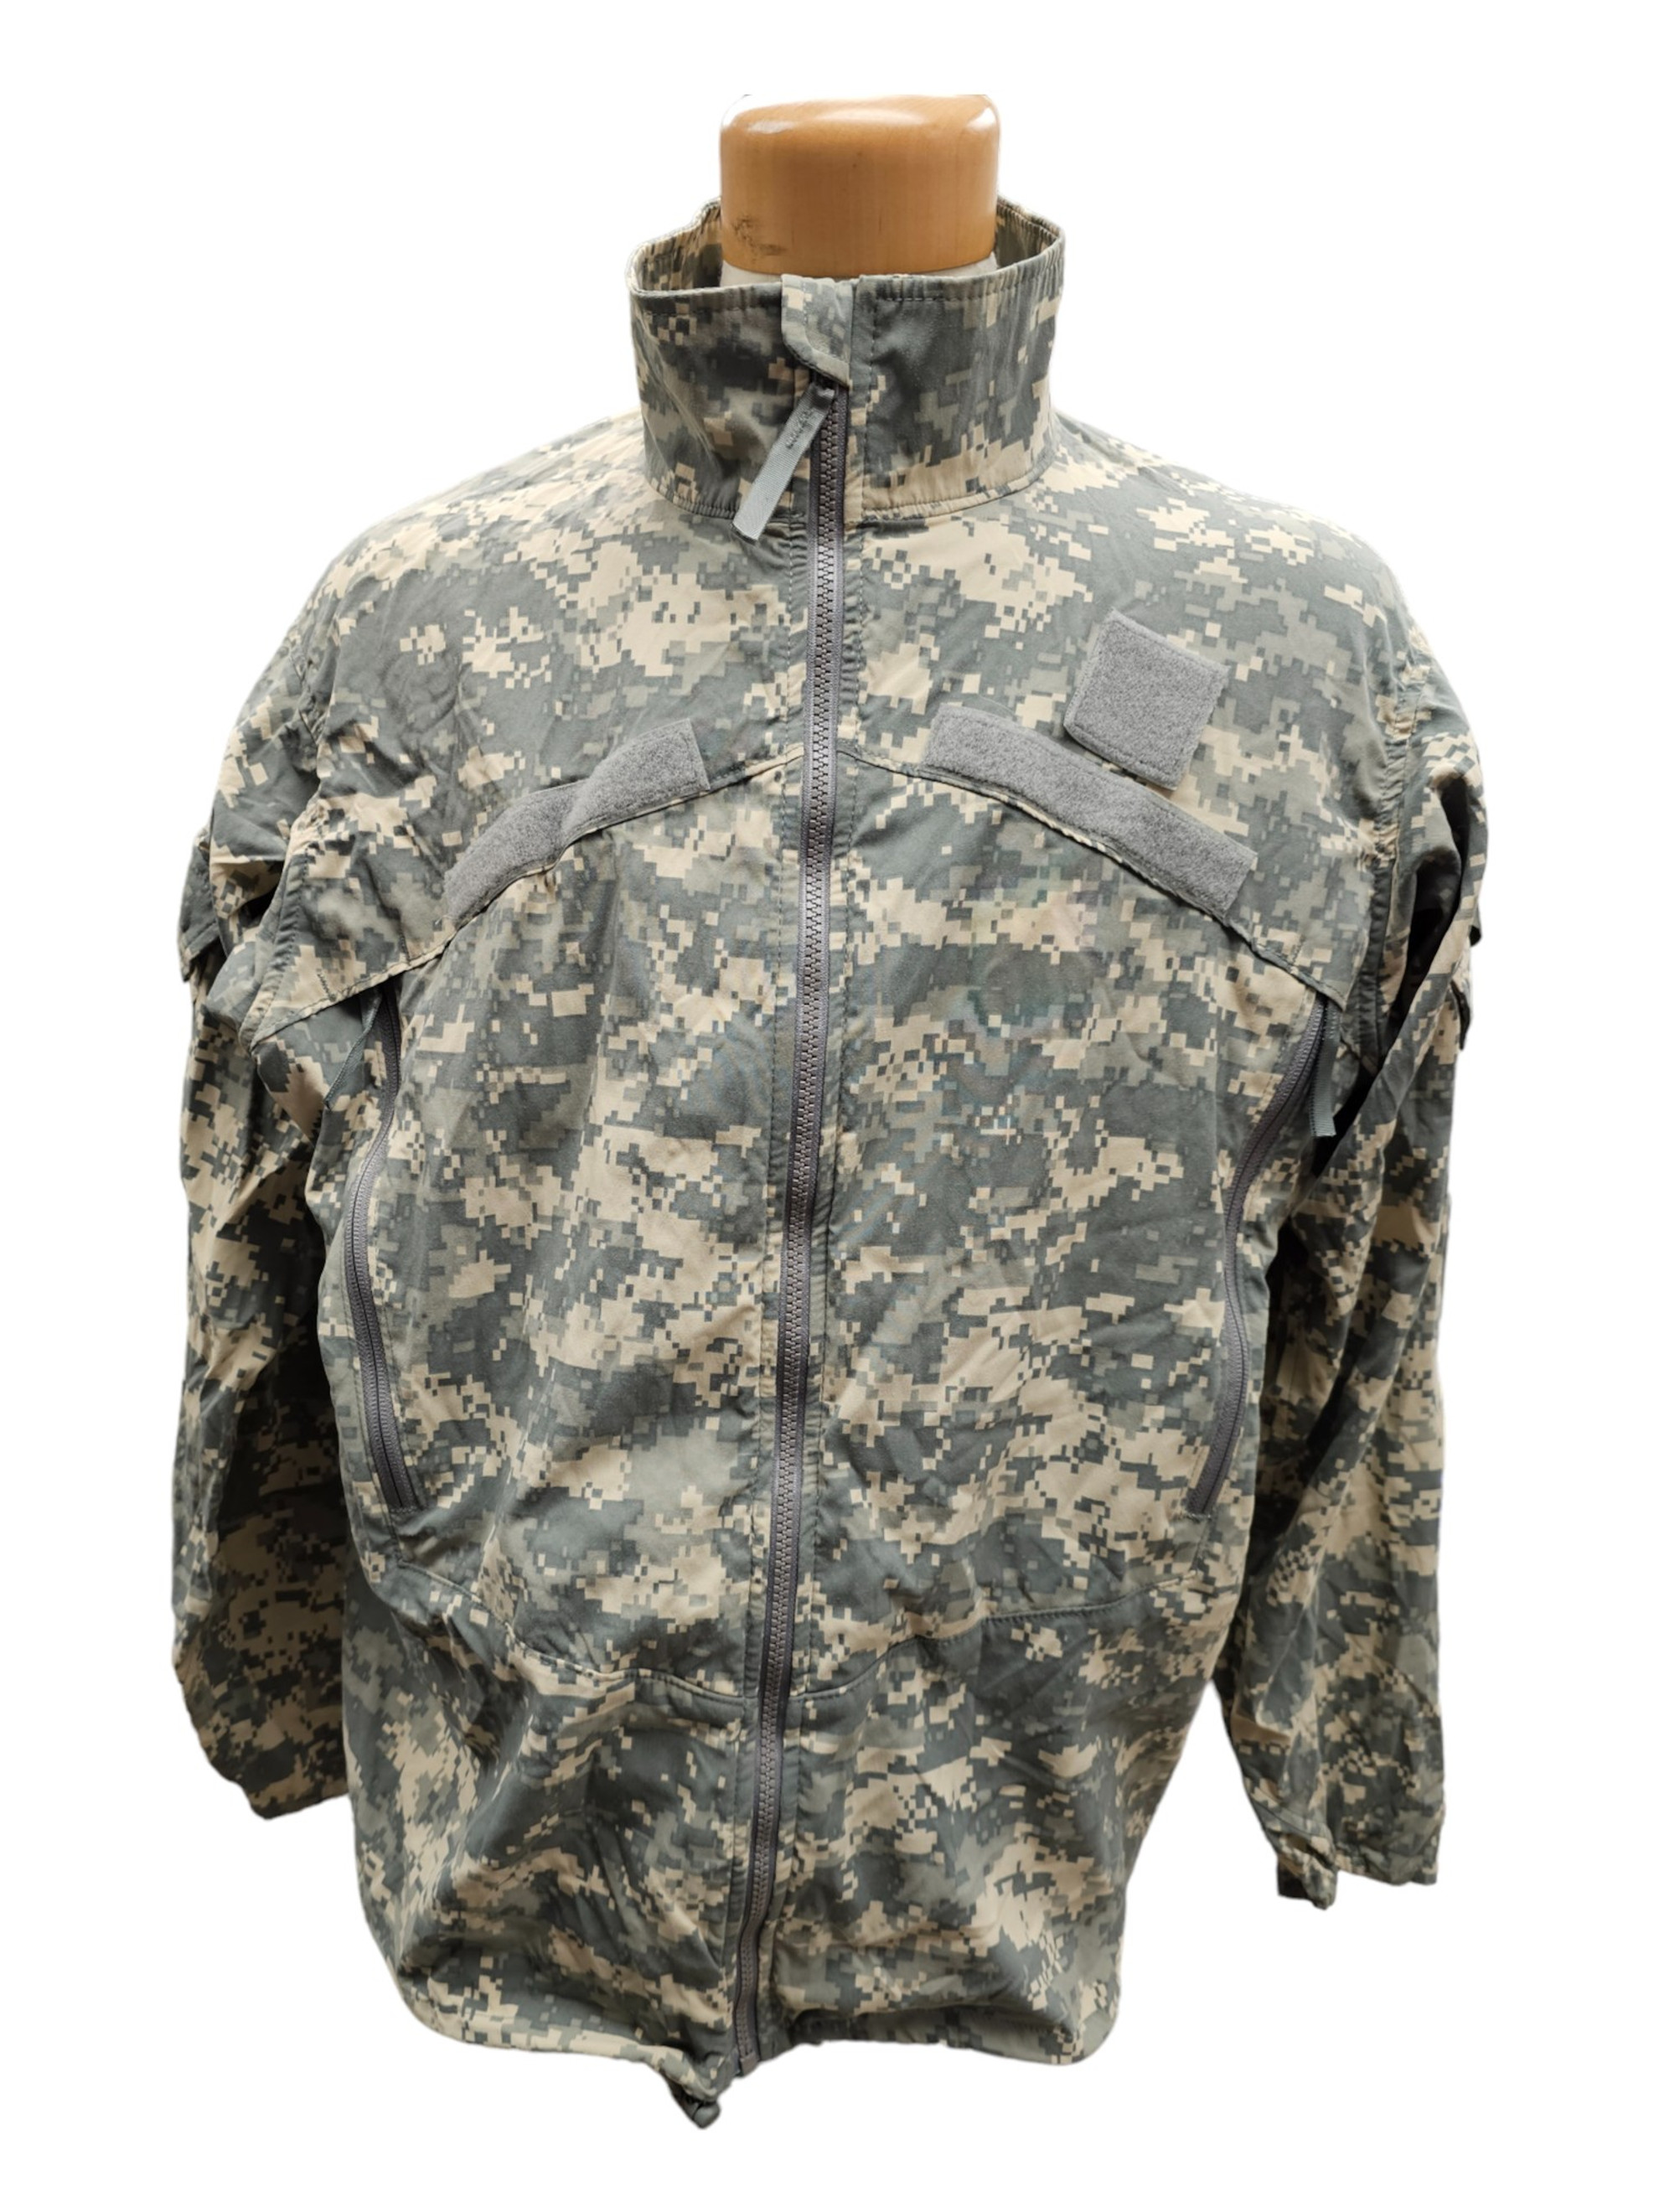 U.S. Armed Forces Issue UCP Cold Weather Wind Jacket